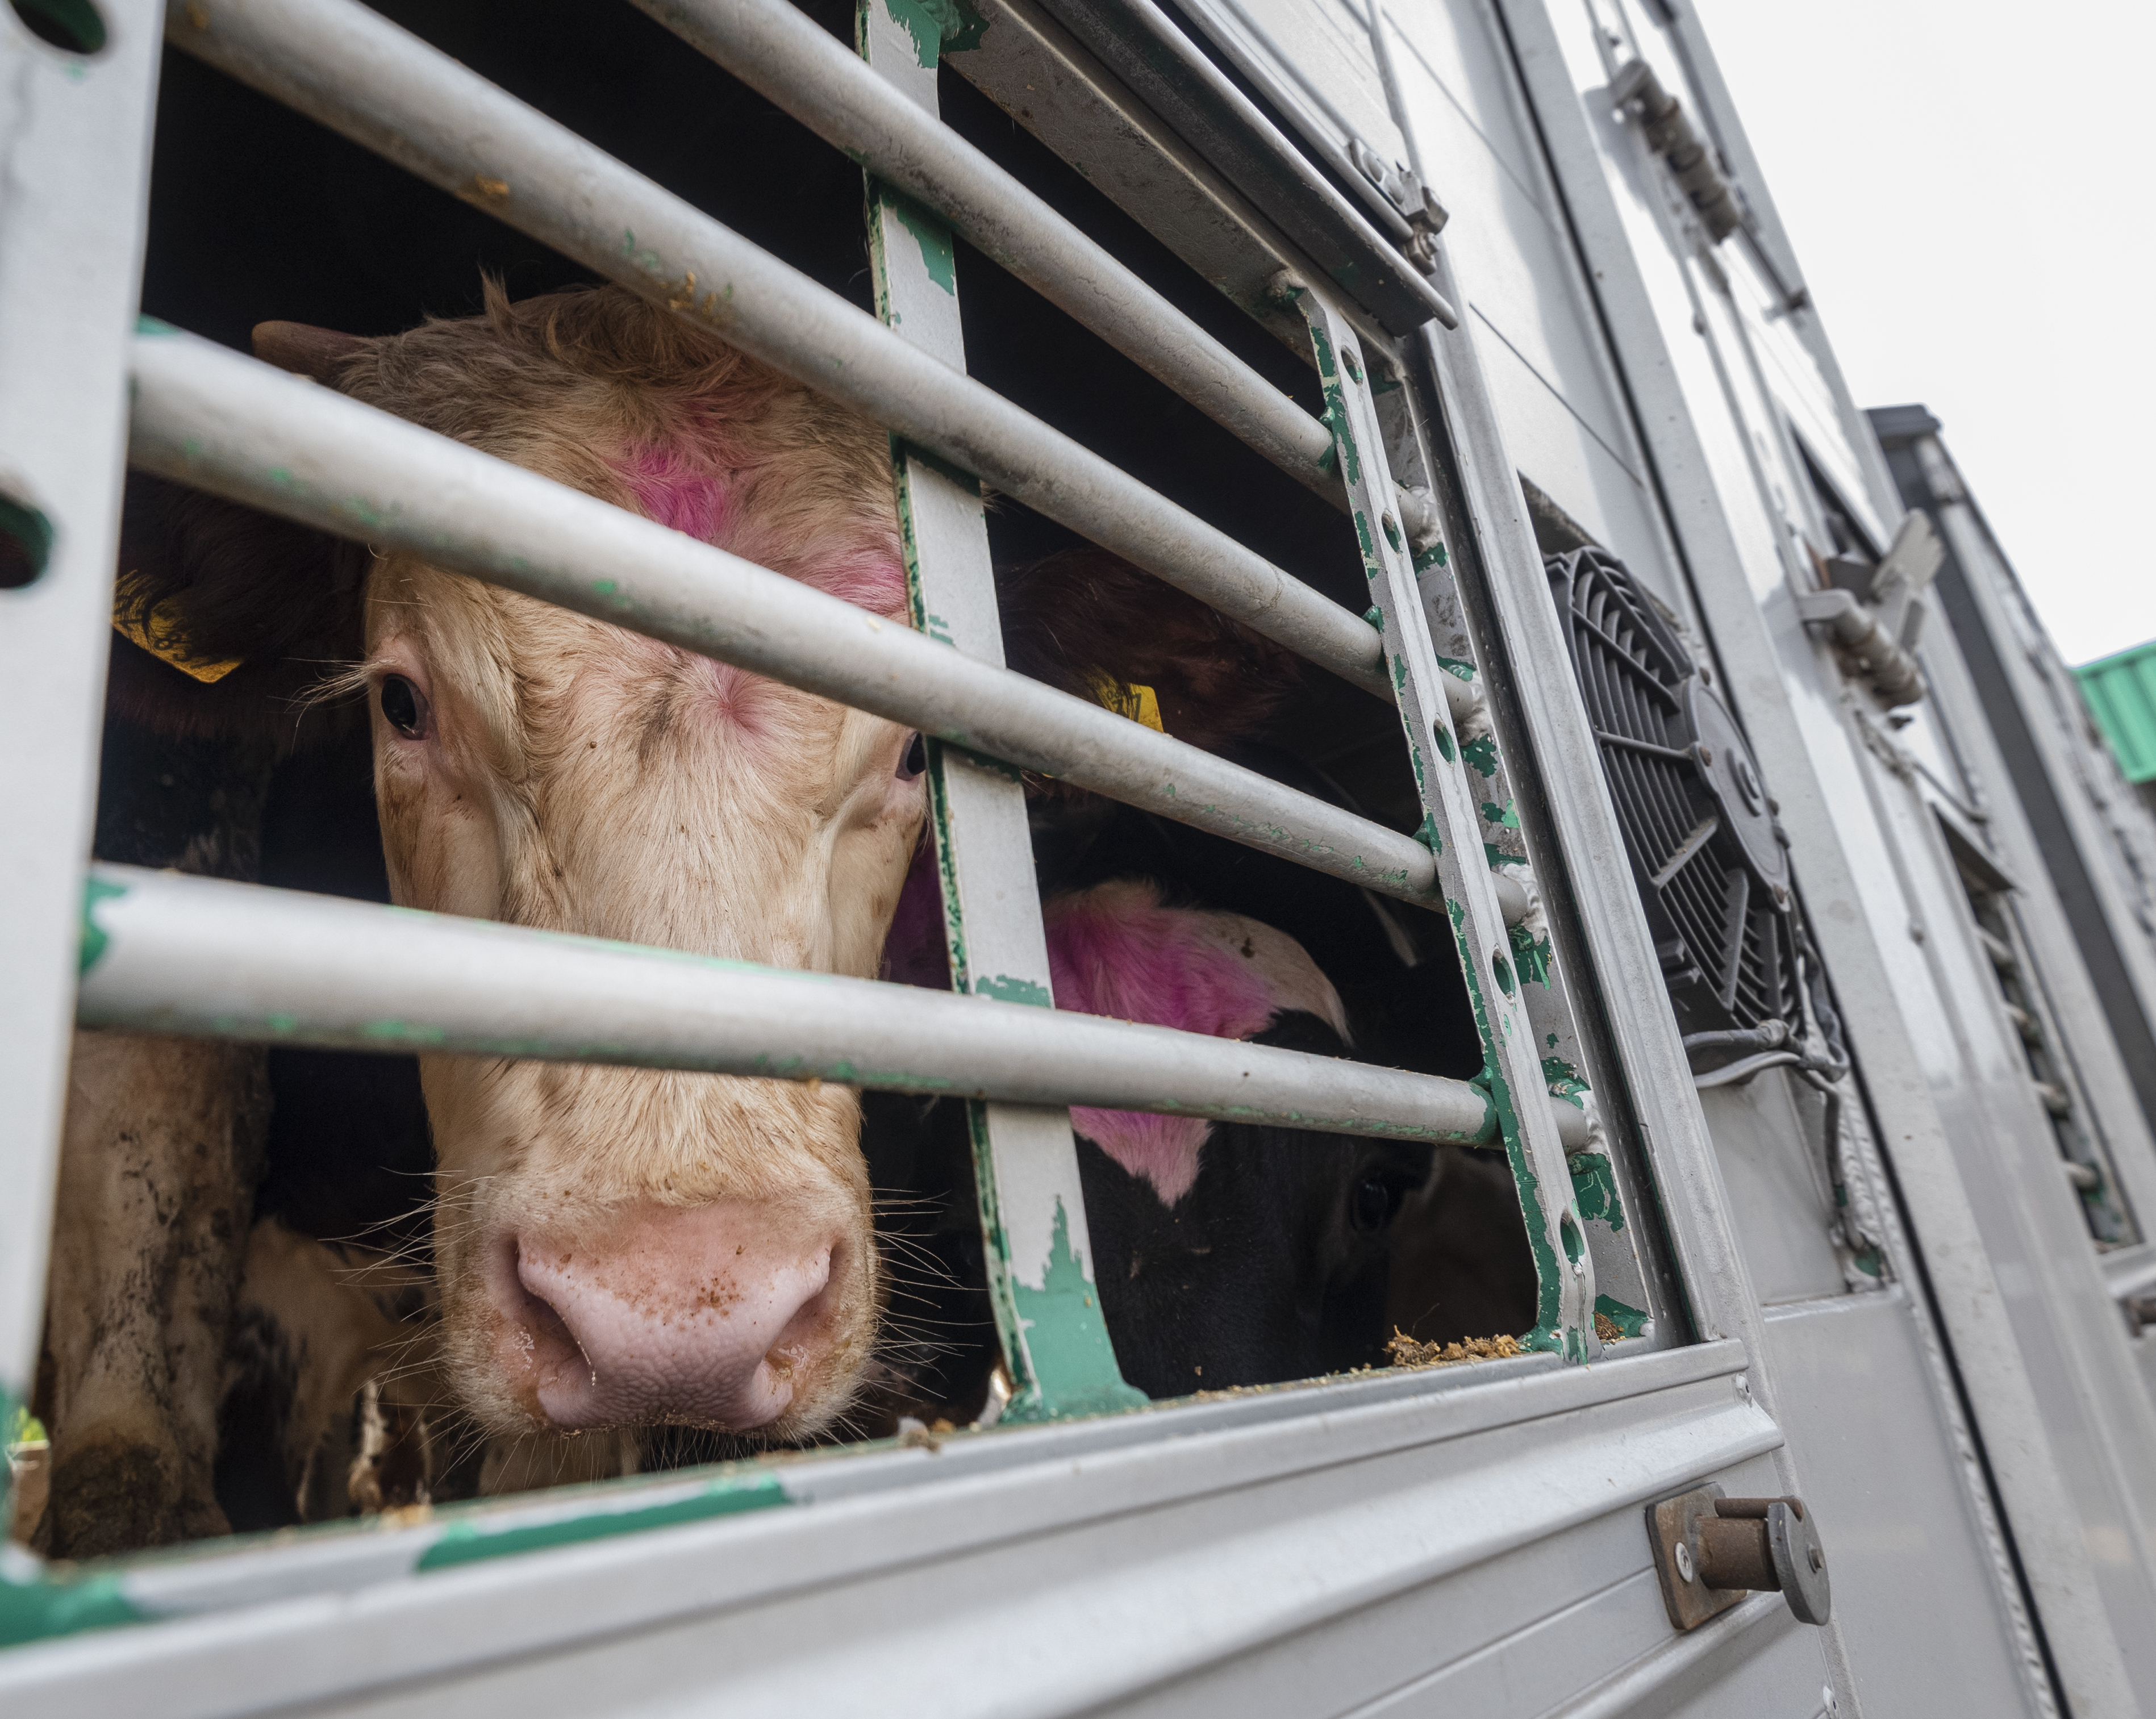 Live cattle transport at the slaughterhouse, copyright FOUR PAWS | Bente Stachowske